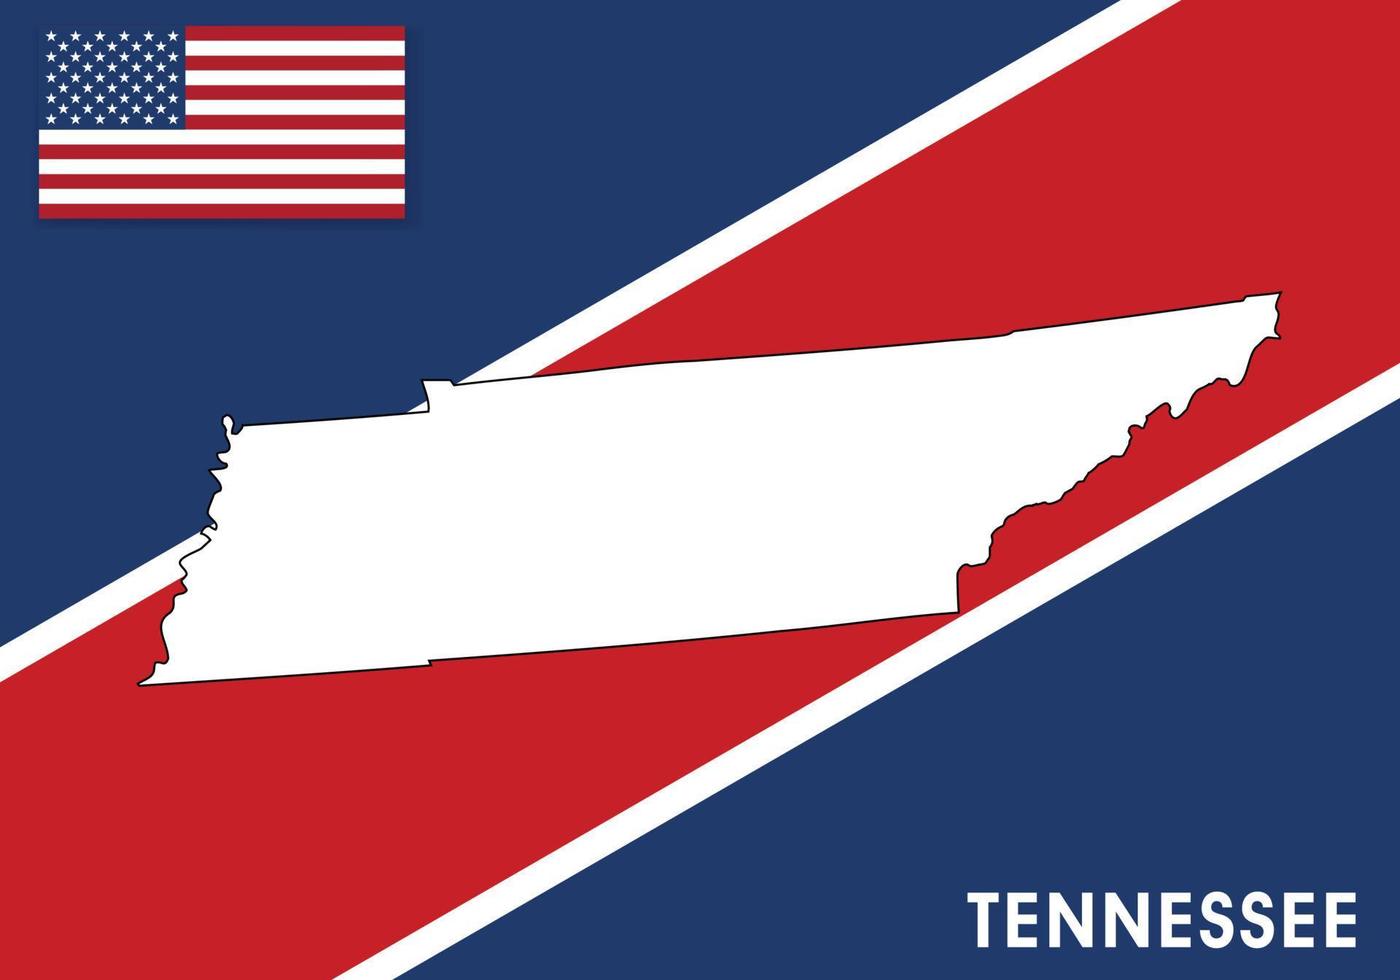 Tennessee - USA, United States of America Map vector template.  white color map on flag background for design, infographic - Vector illustration eps 10